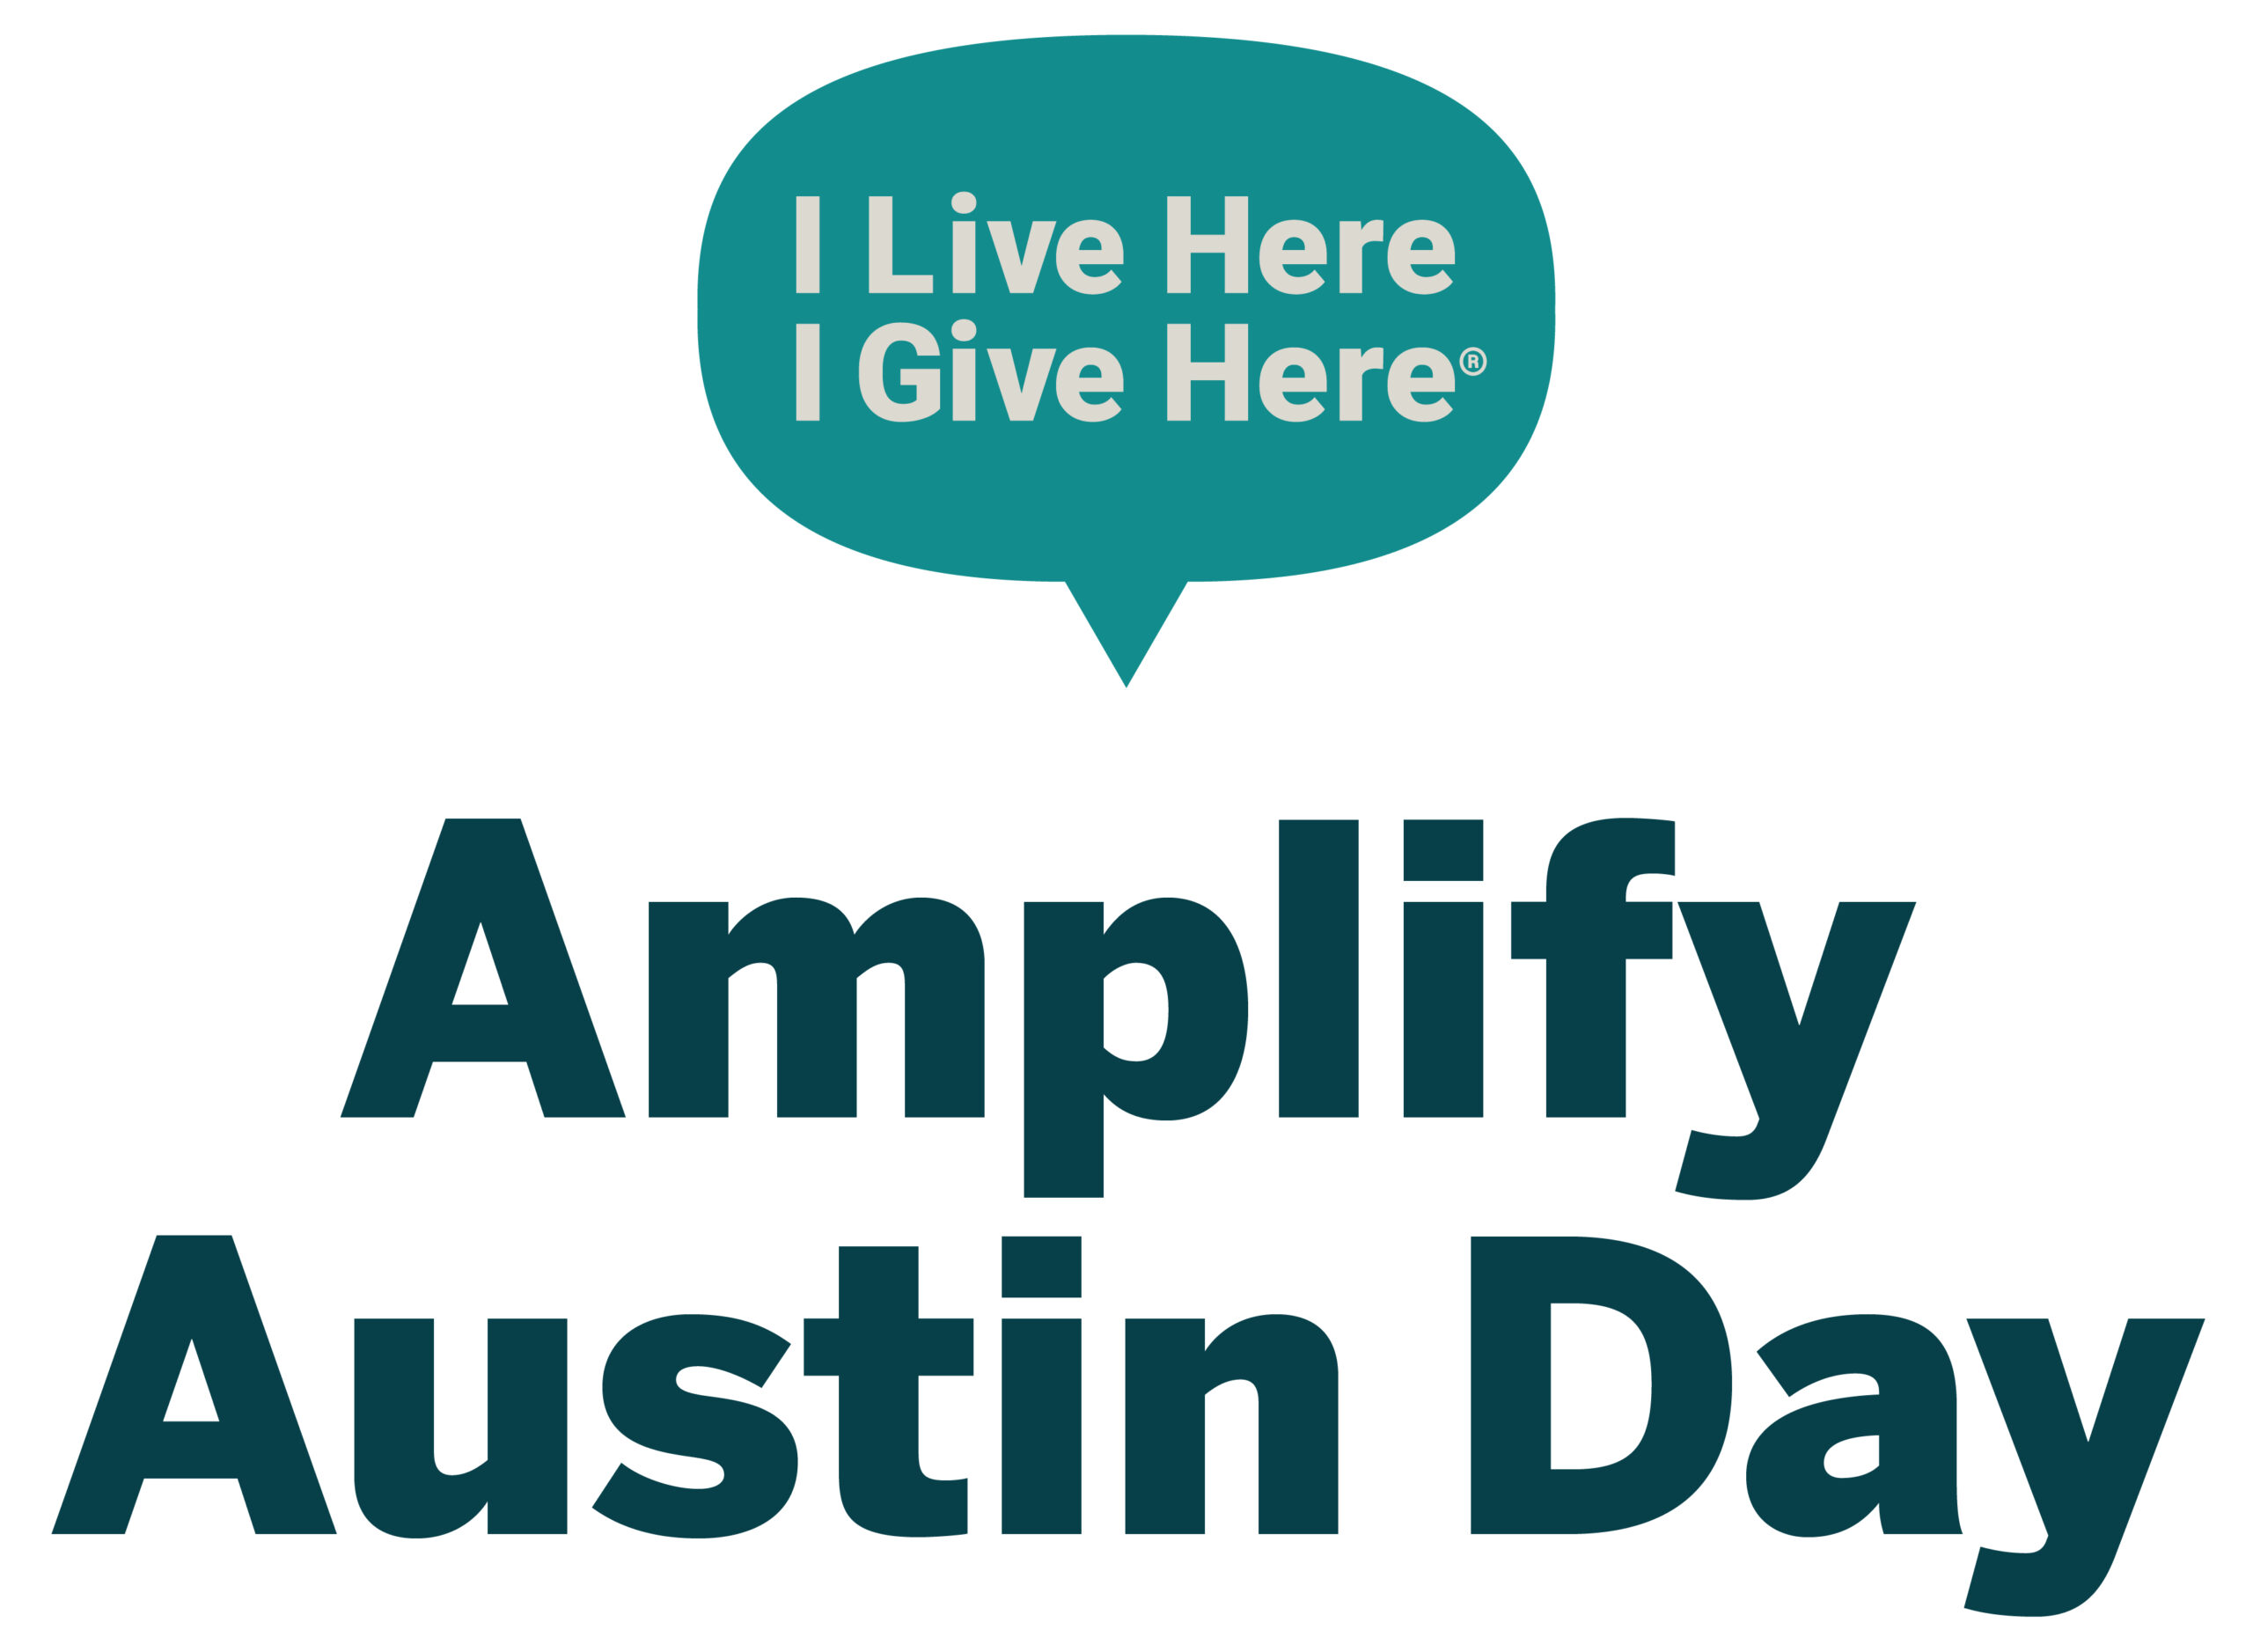 Amplify Austin Day - I Live Here I Give Here